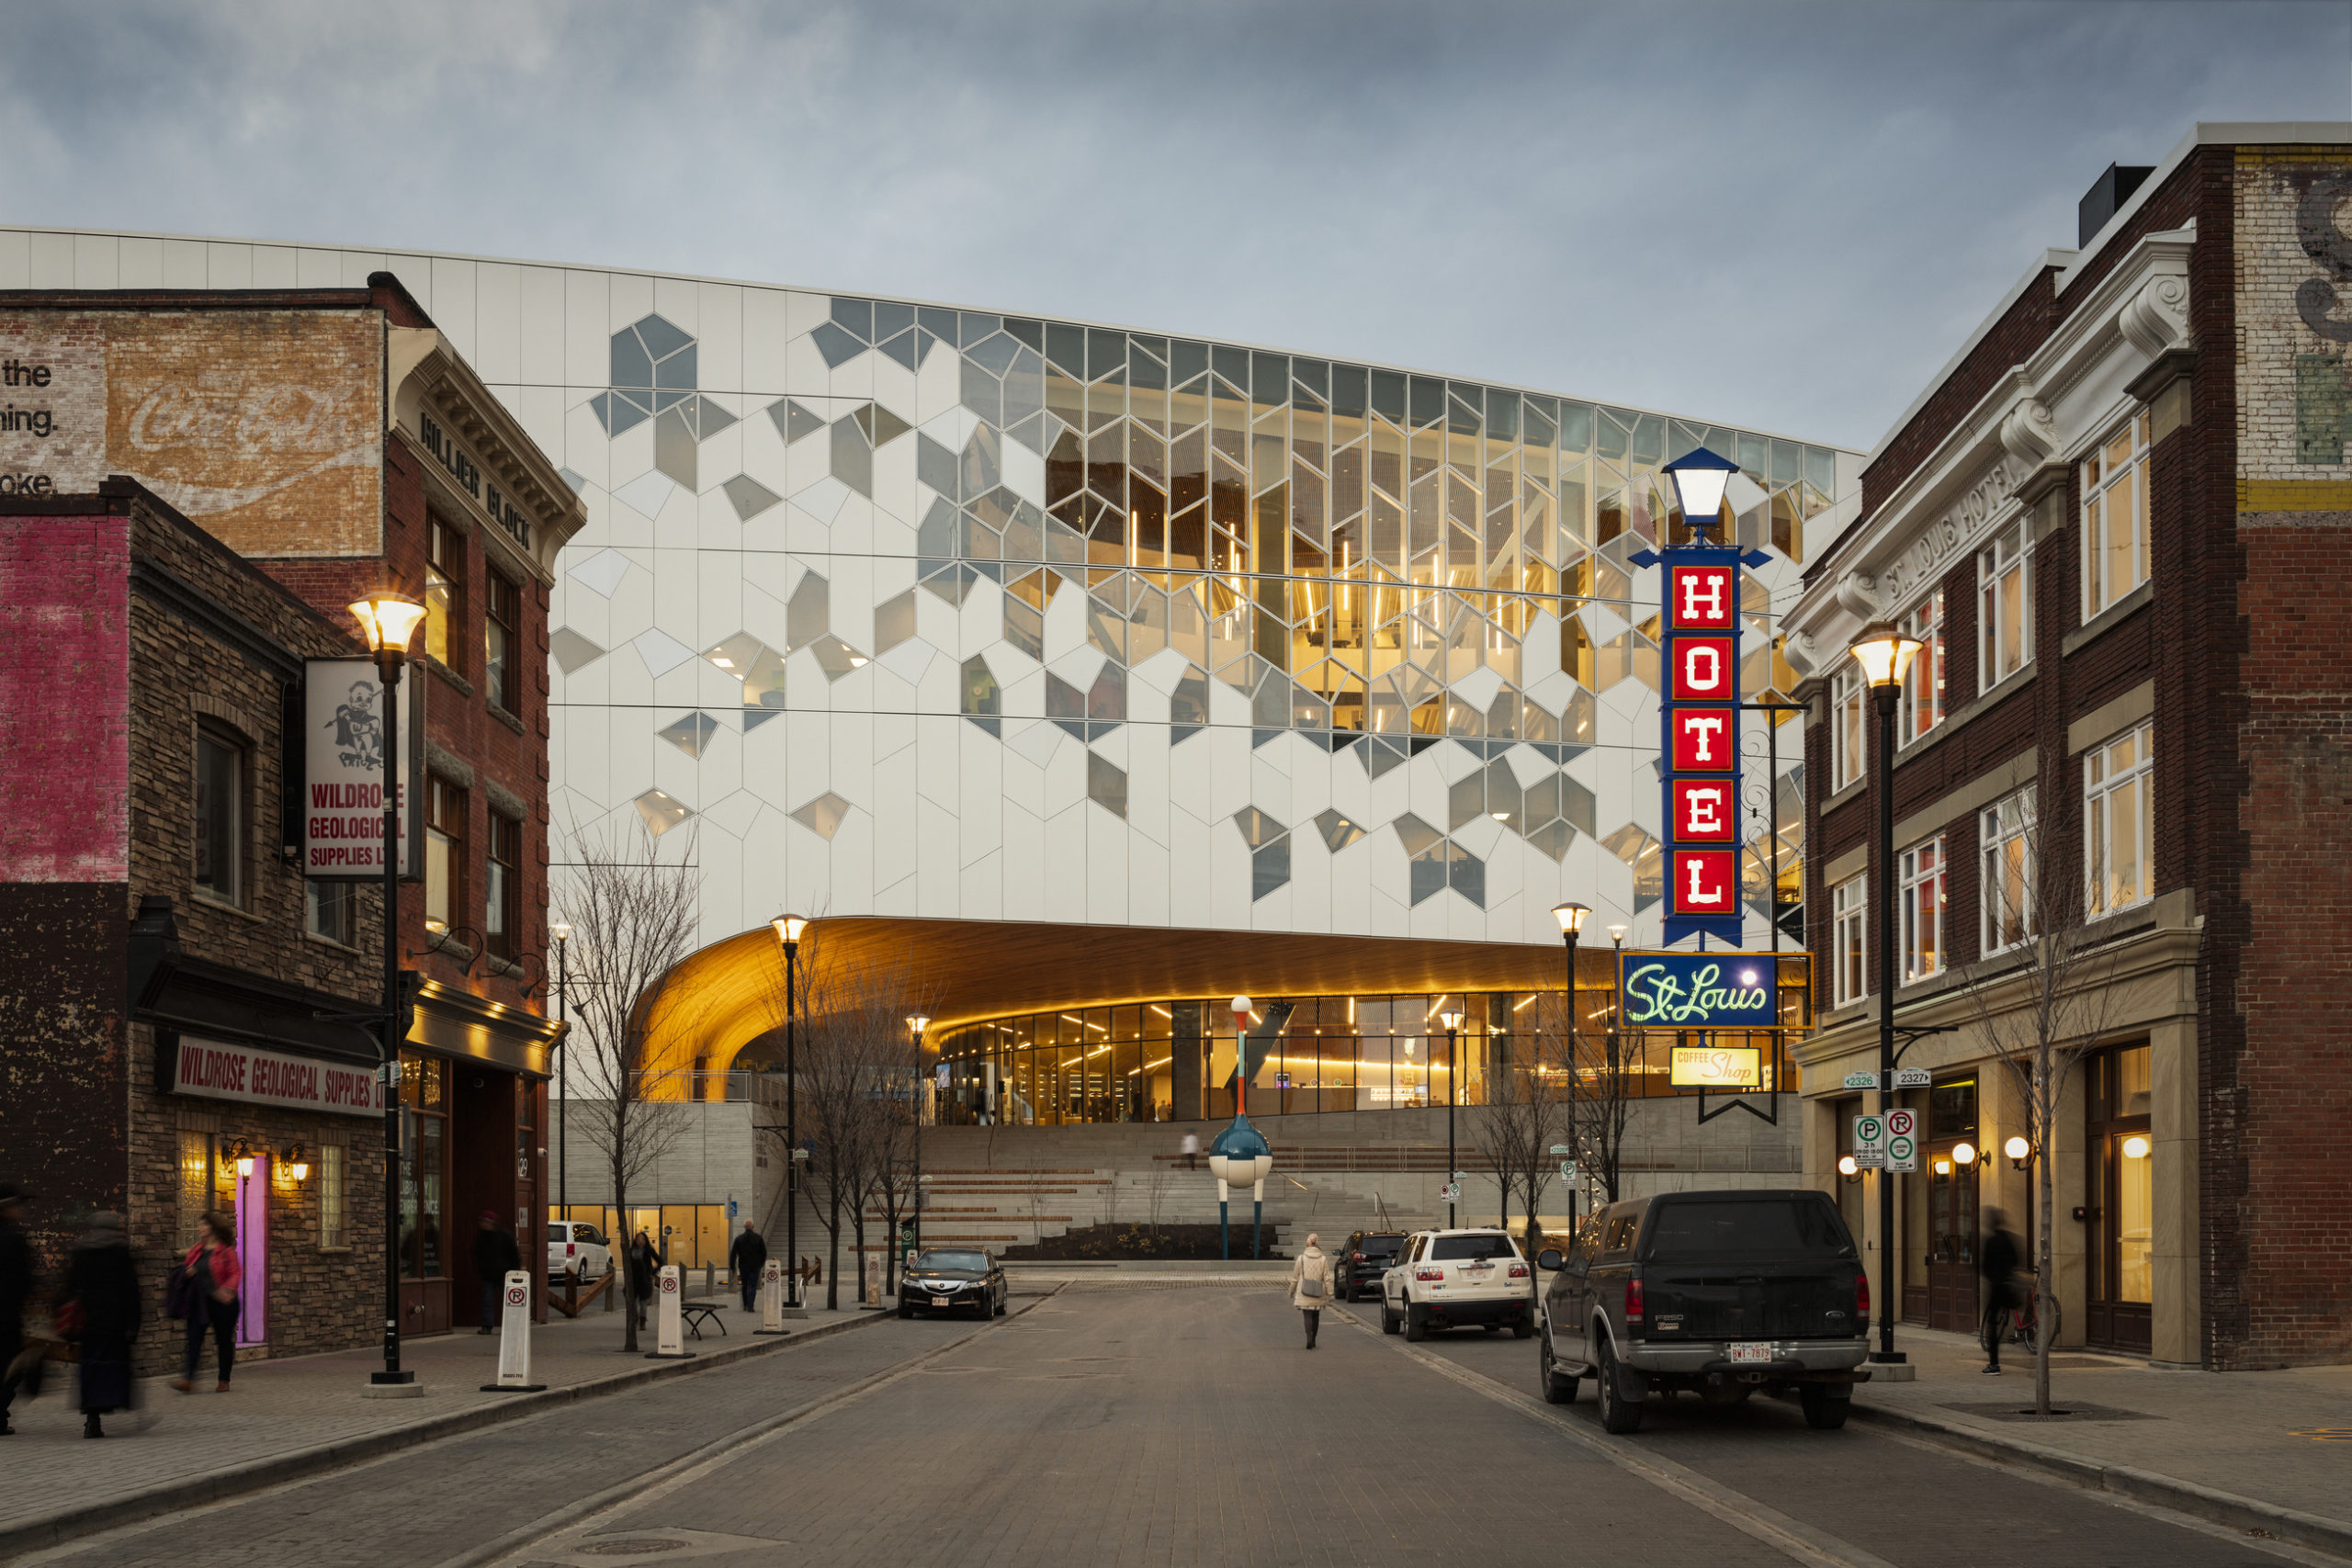 Architecture Honor Award: Calgary Central Library by Snøhetta and DIALOG, in Calgary, Canada. Photo: Michael Grimm/Snøhetta.